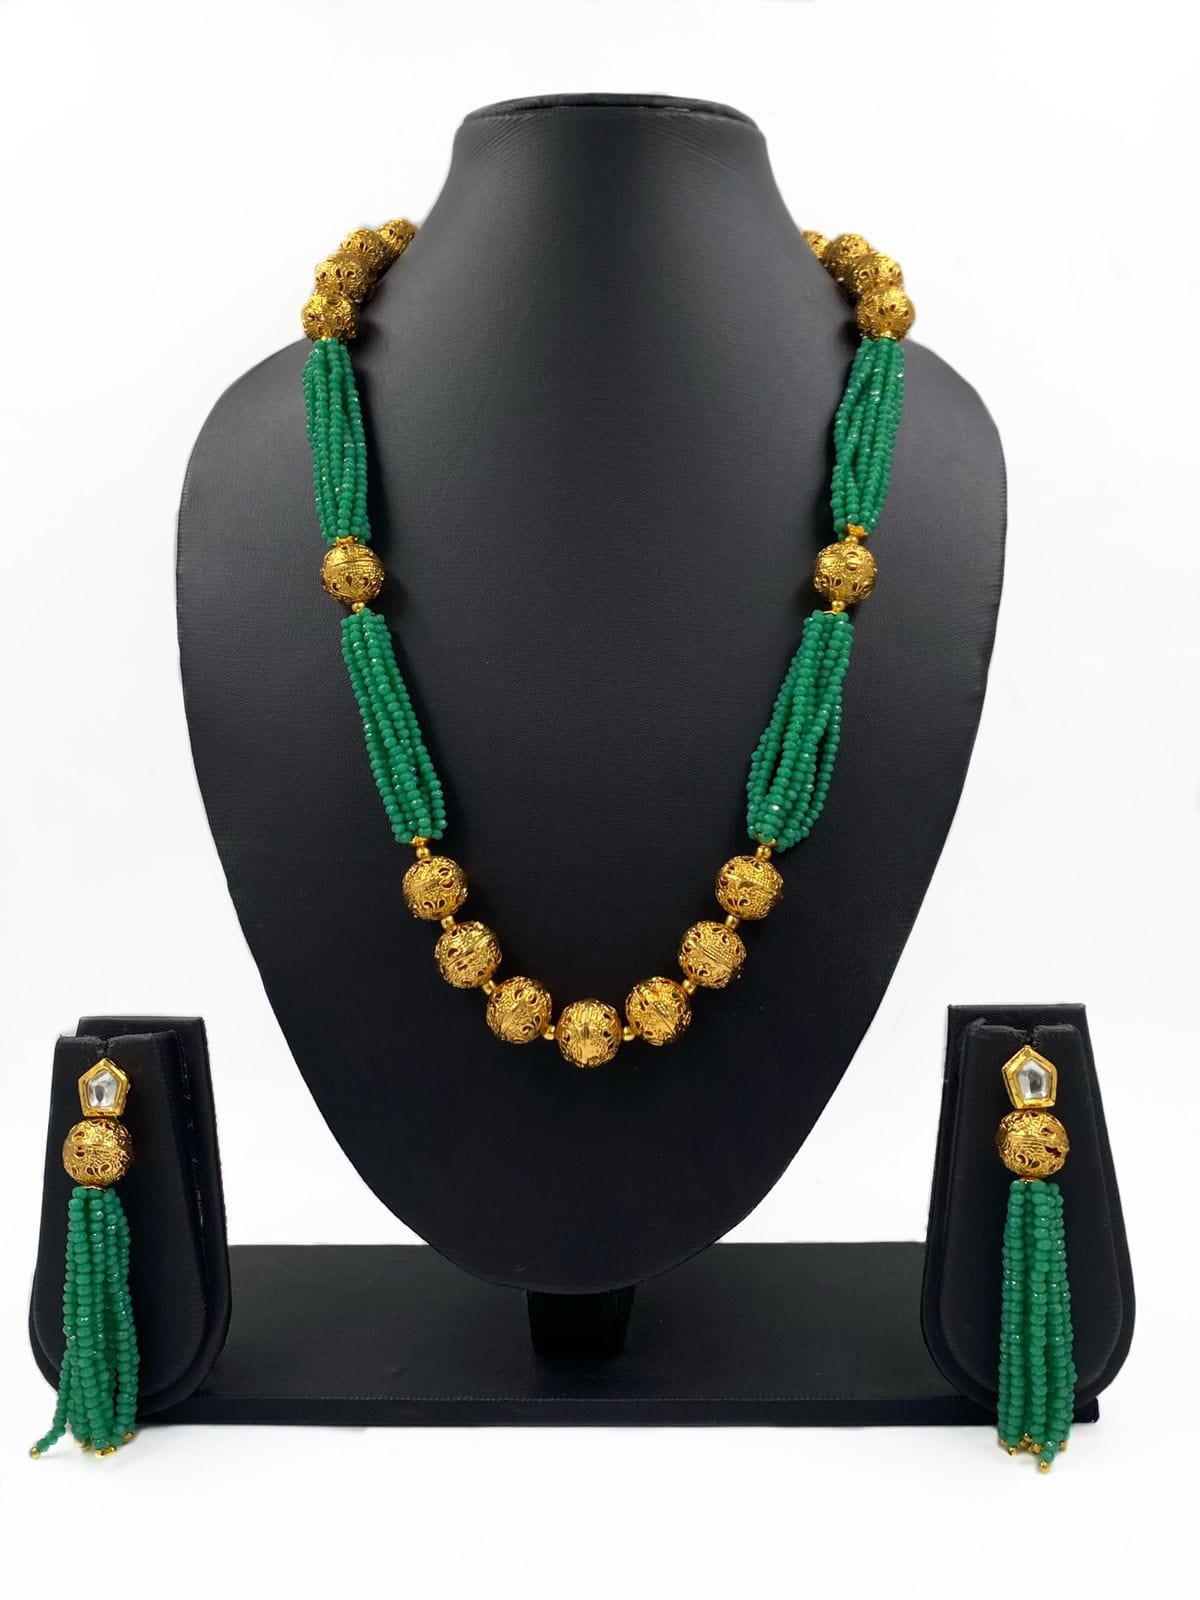 Designer Sea Green Crystal And Golden Beads Necklace For Woman By Gehna Shop Beads Jewellery